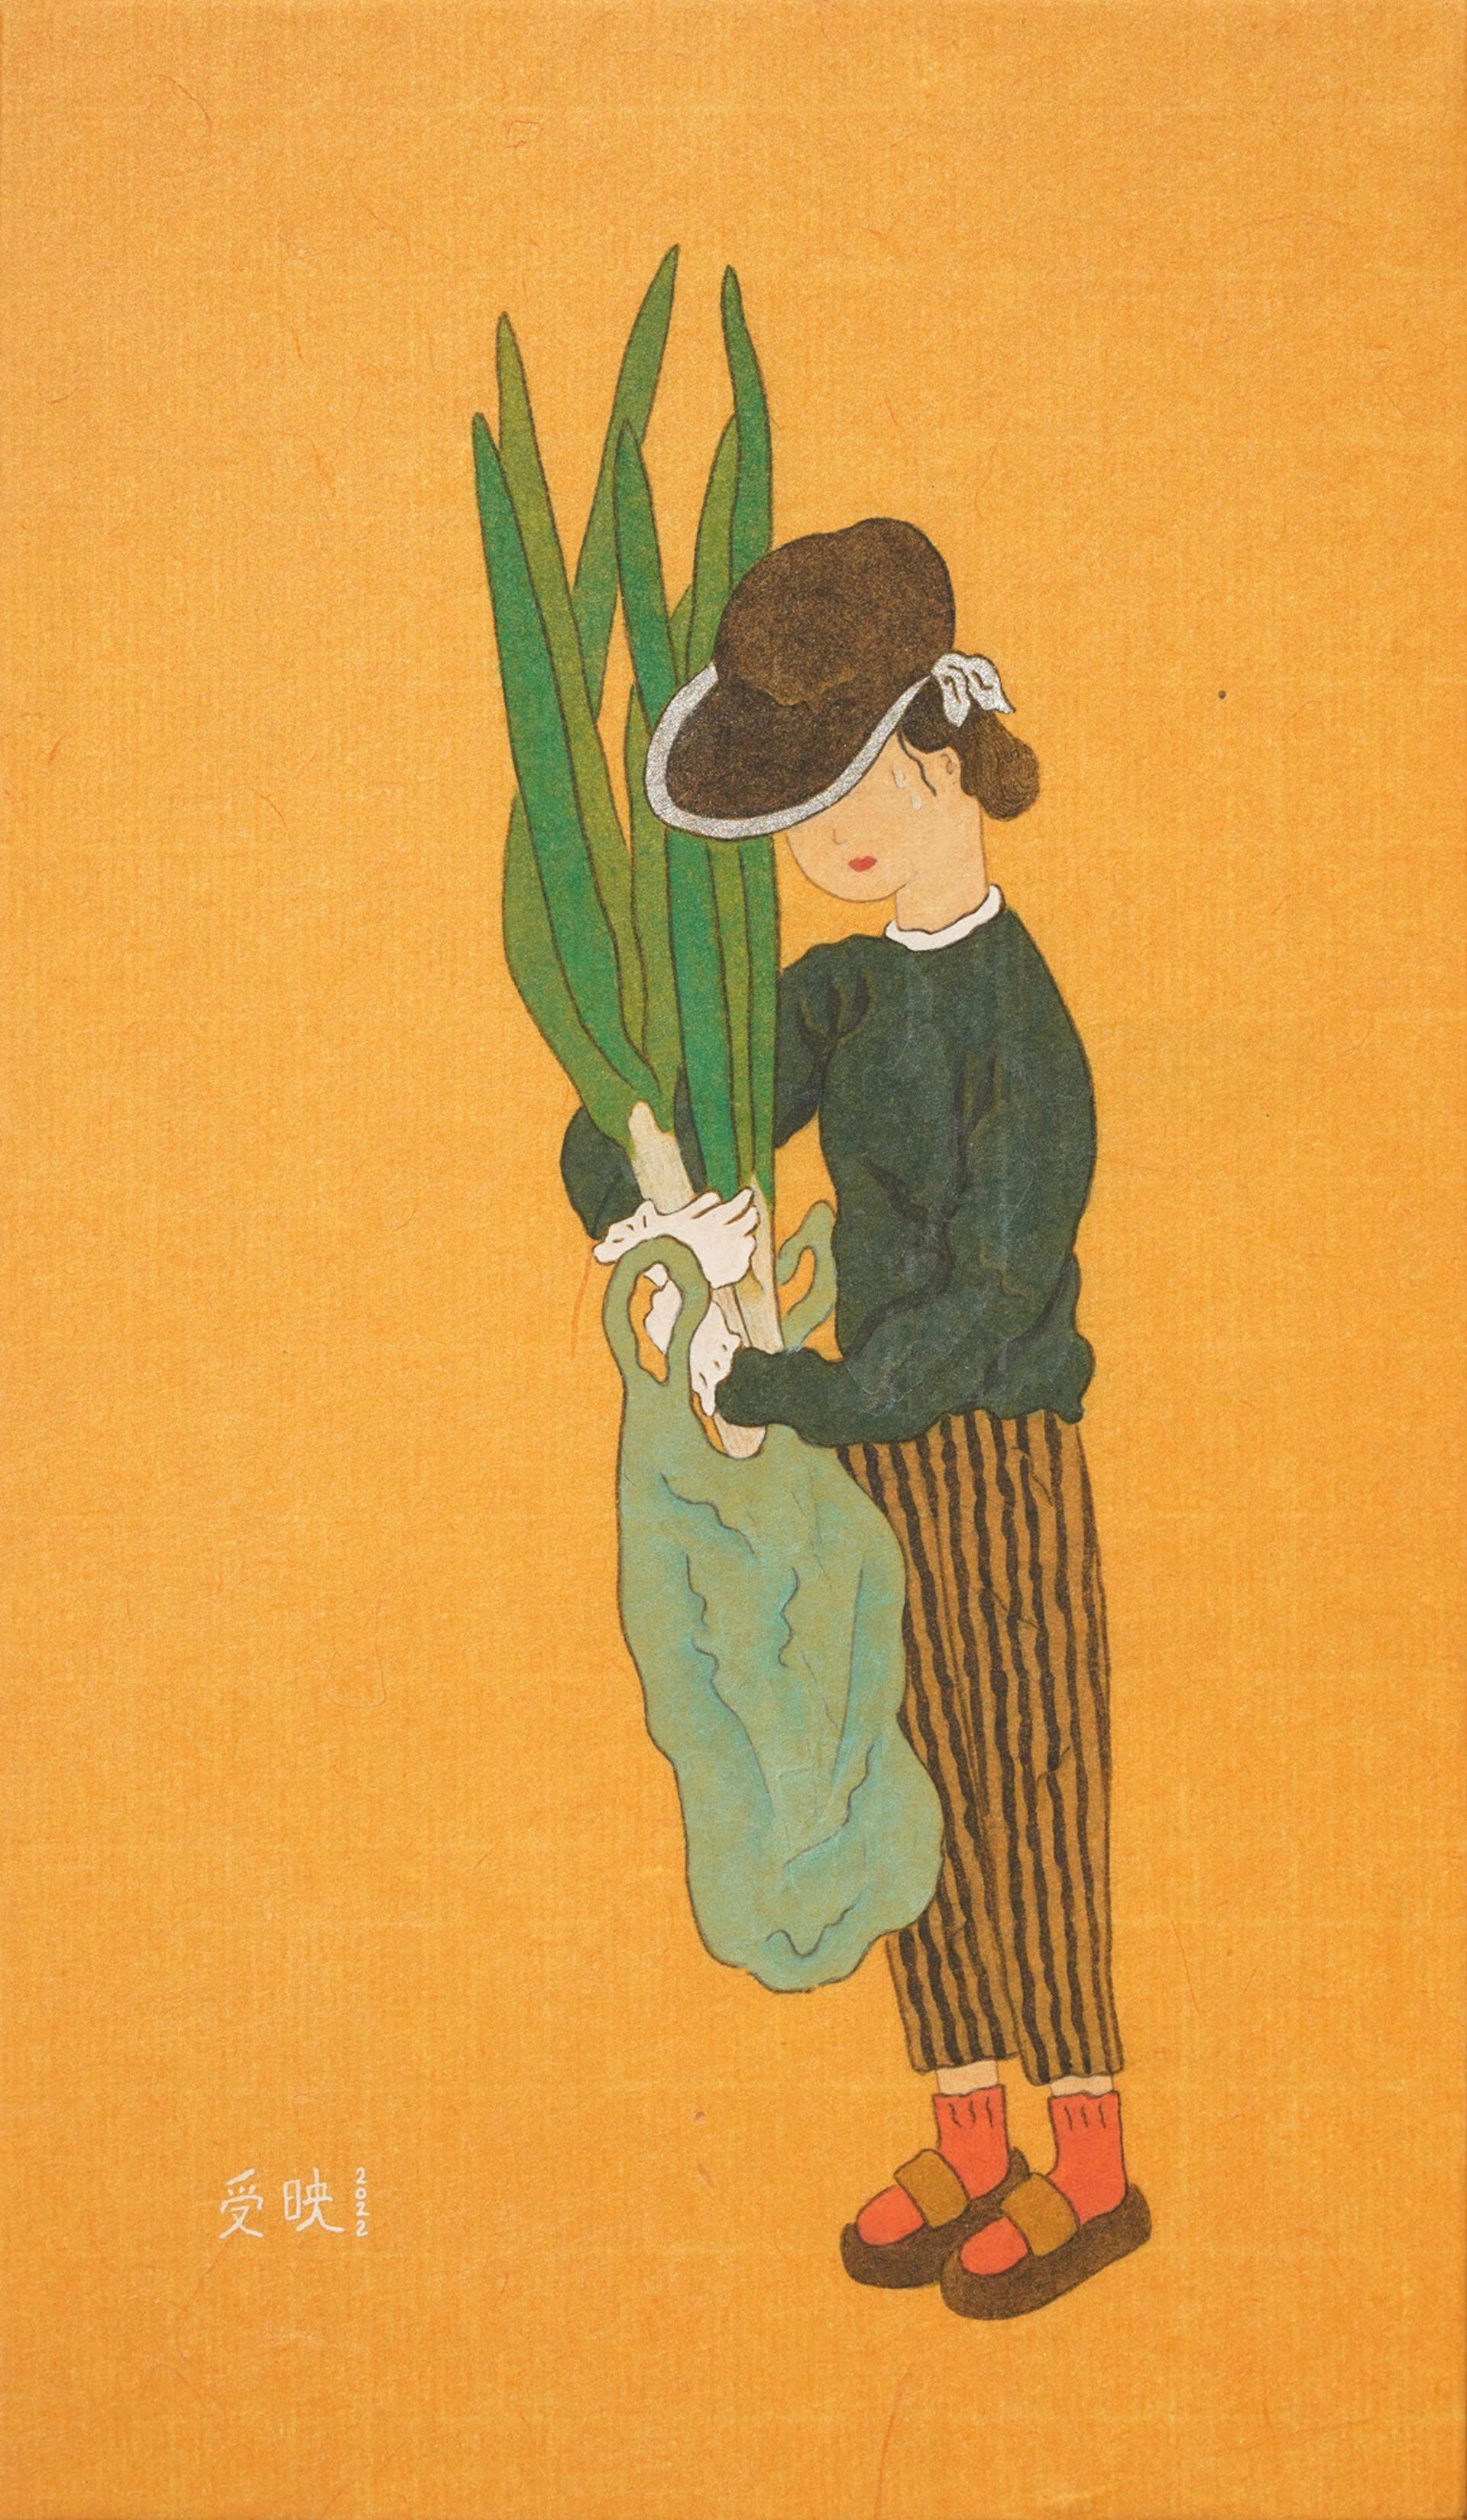 A woman with green onions